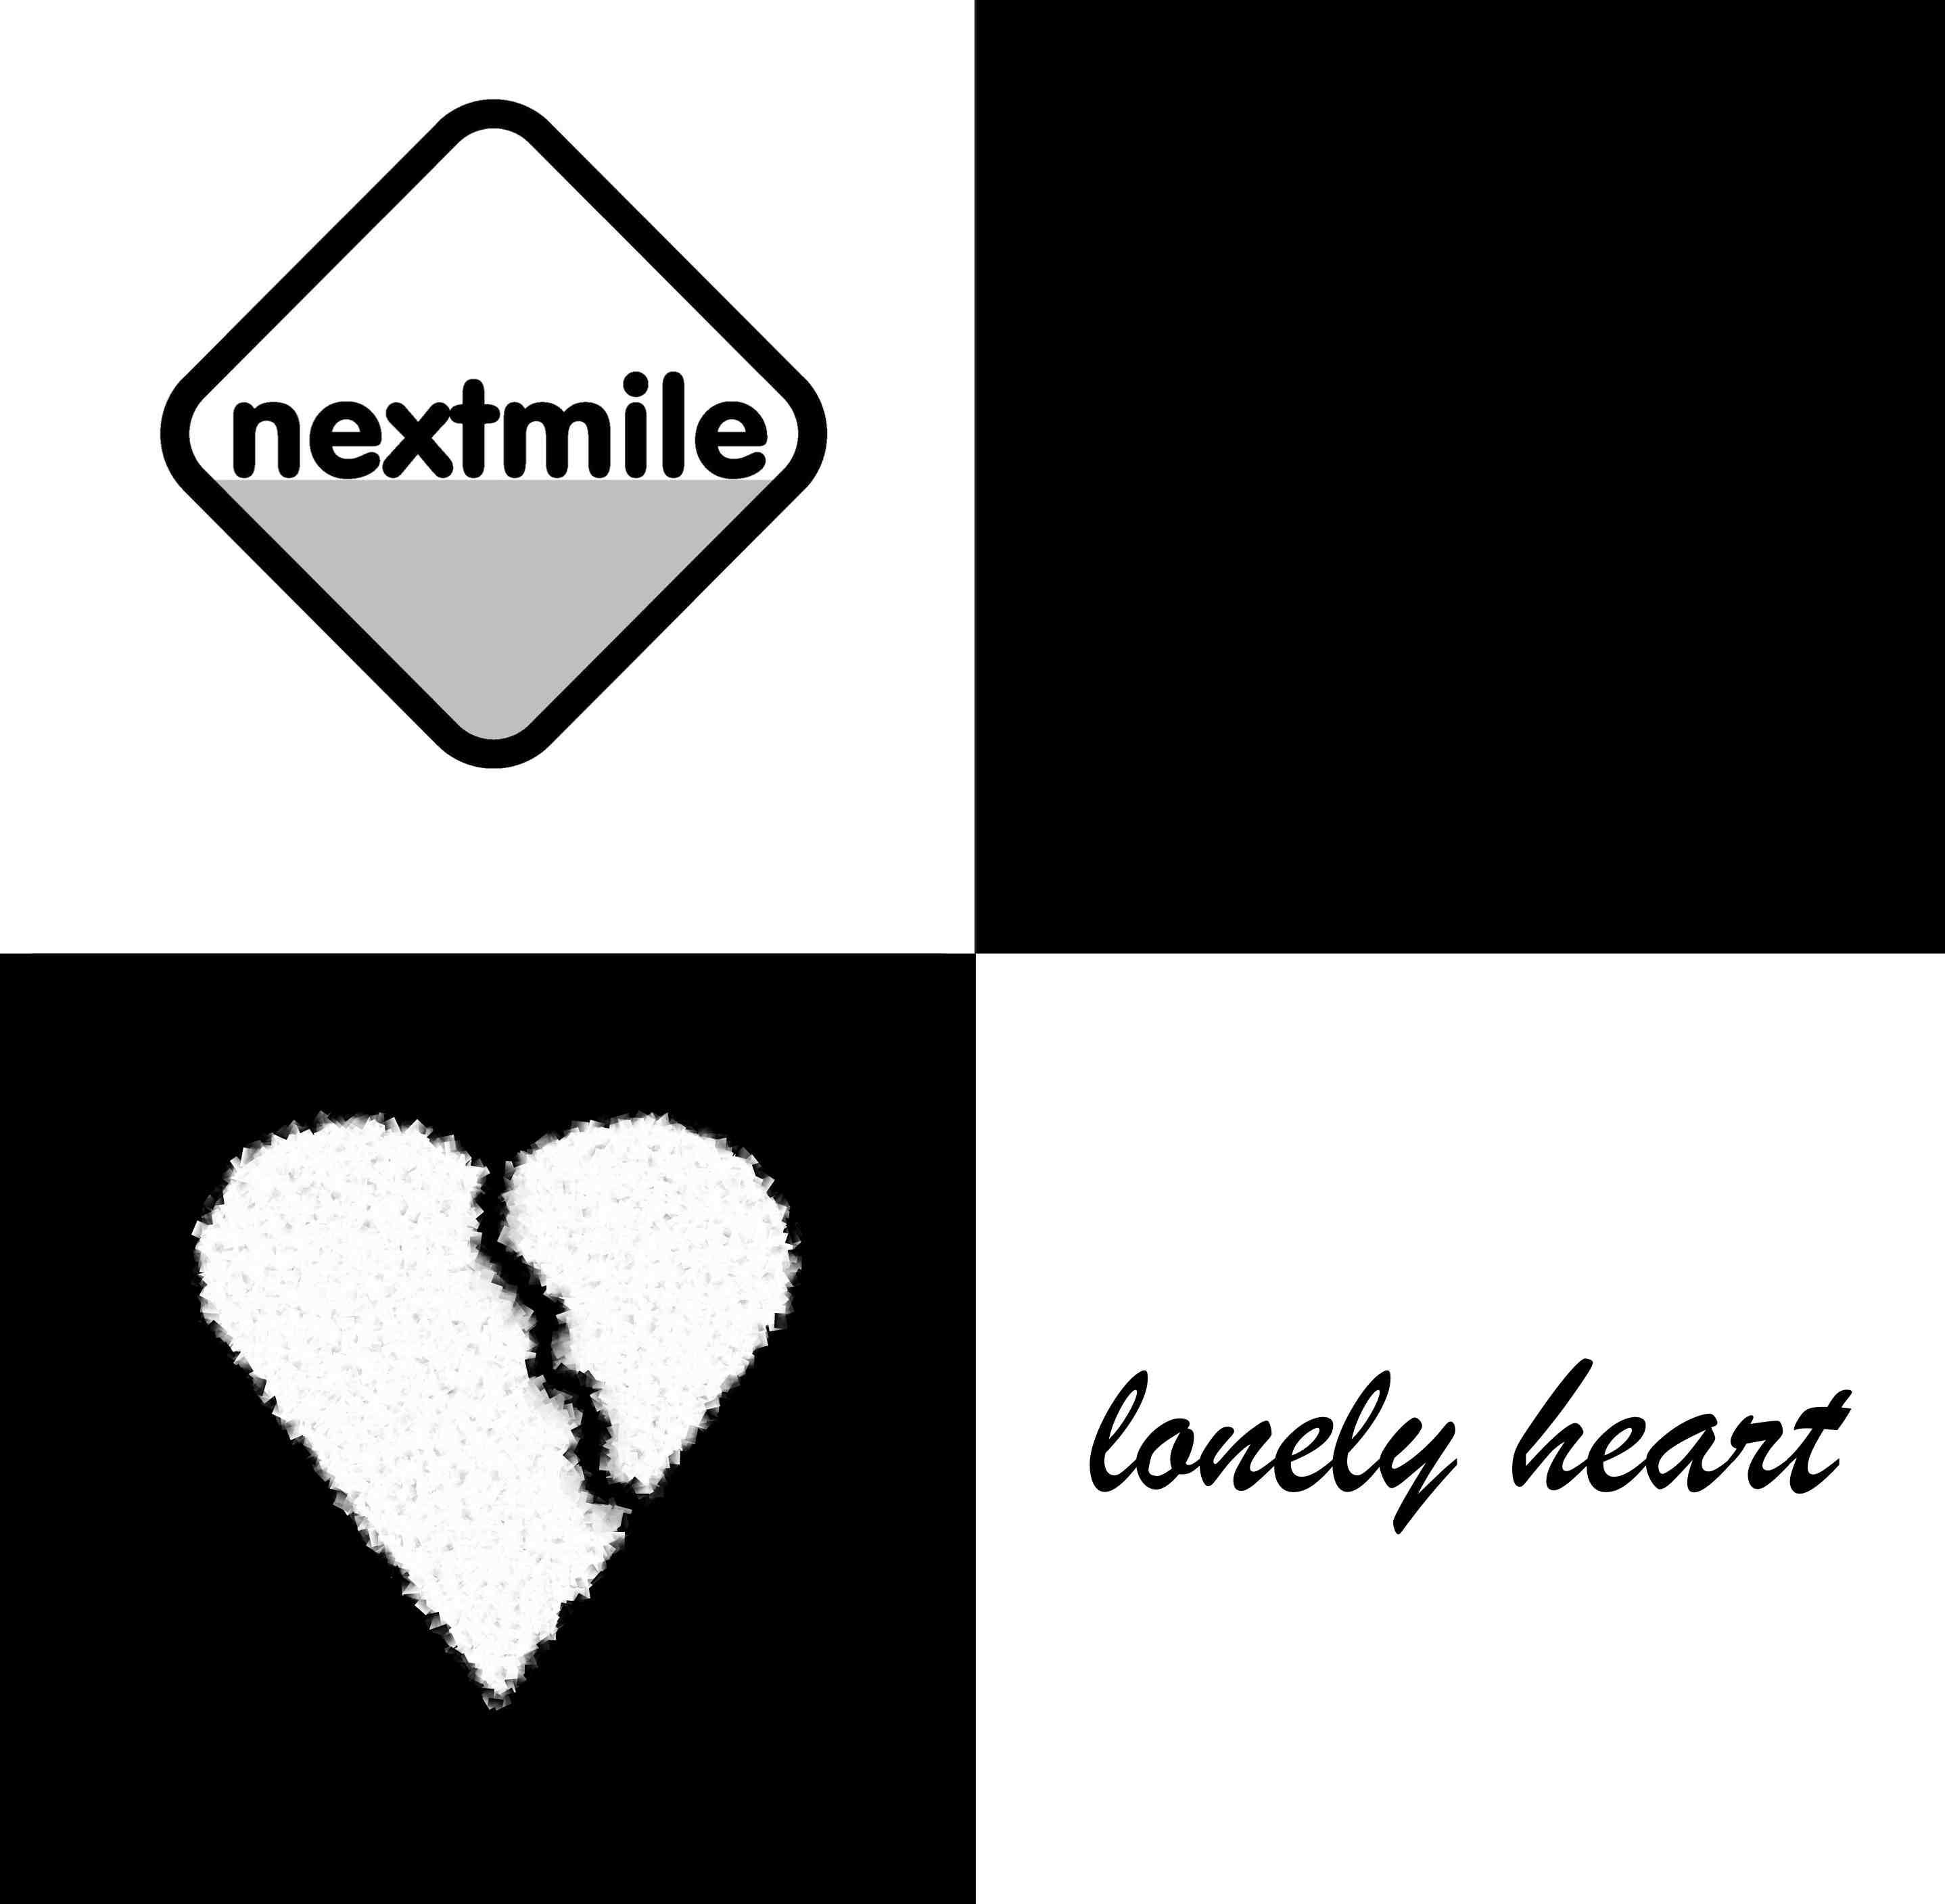 Lonely Hearts. Assix Hearts Extended. Instagram x.Lonely_Heart.x. Lonely Heart(NM/NM). Lonely mixed